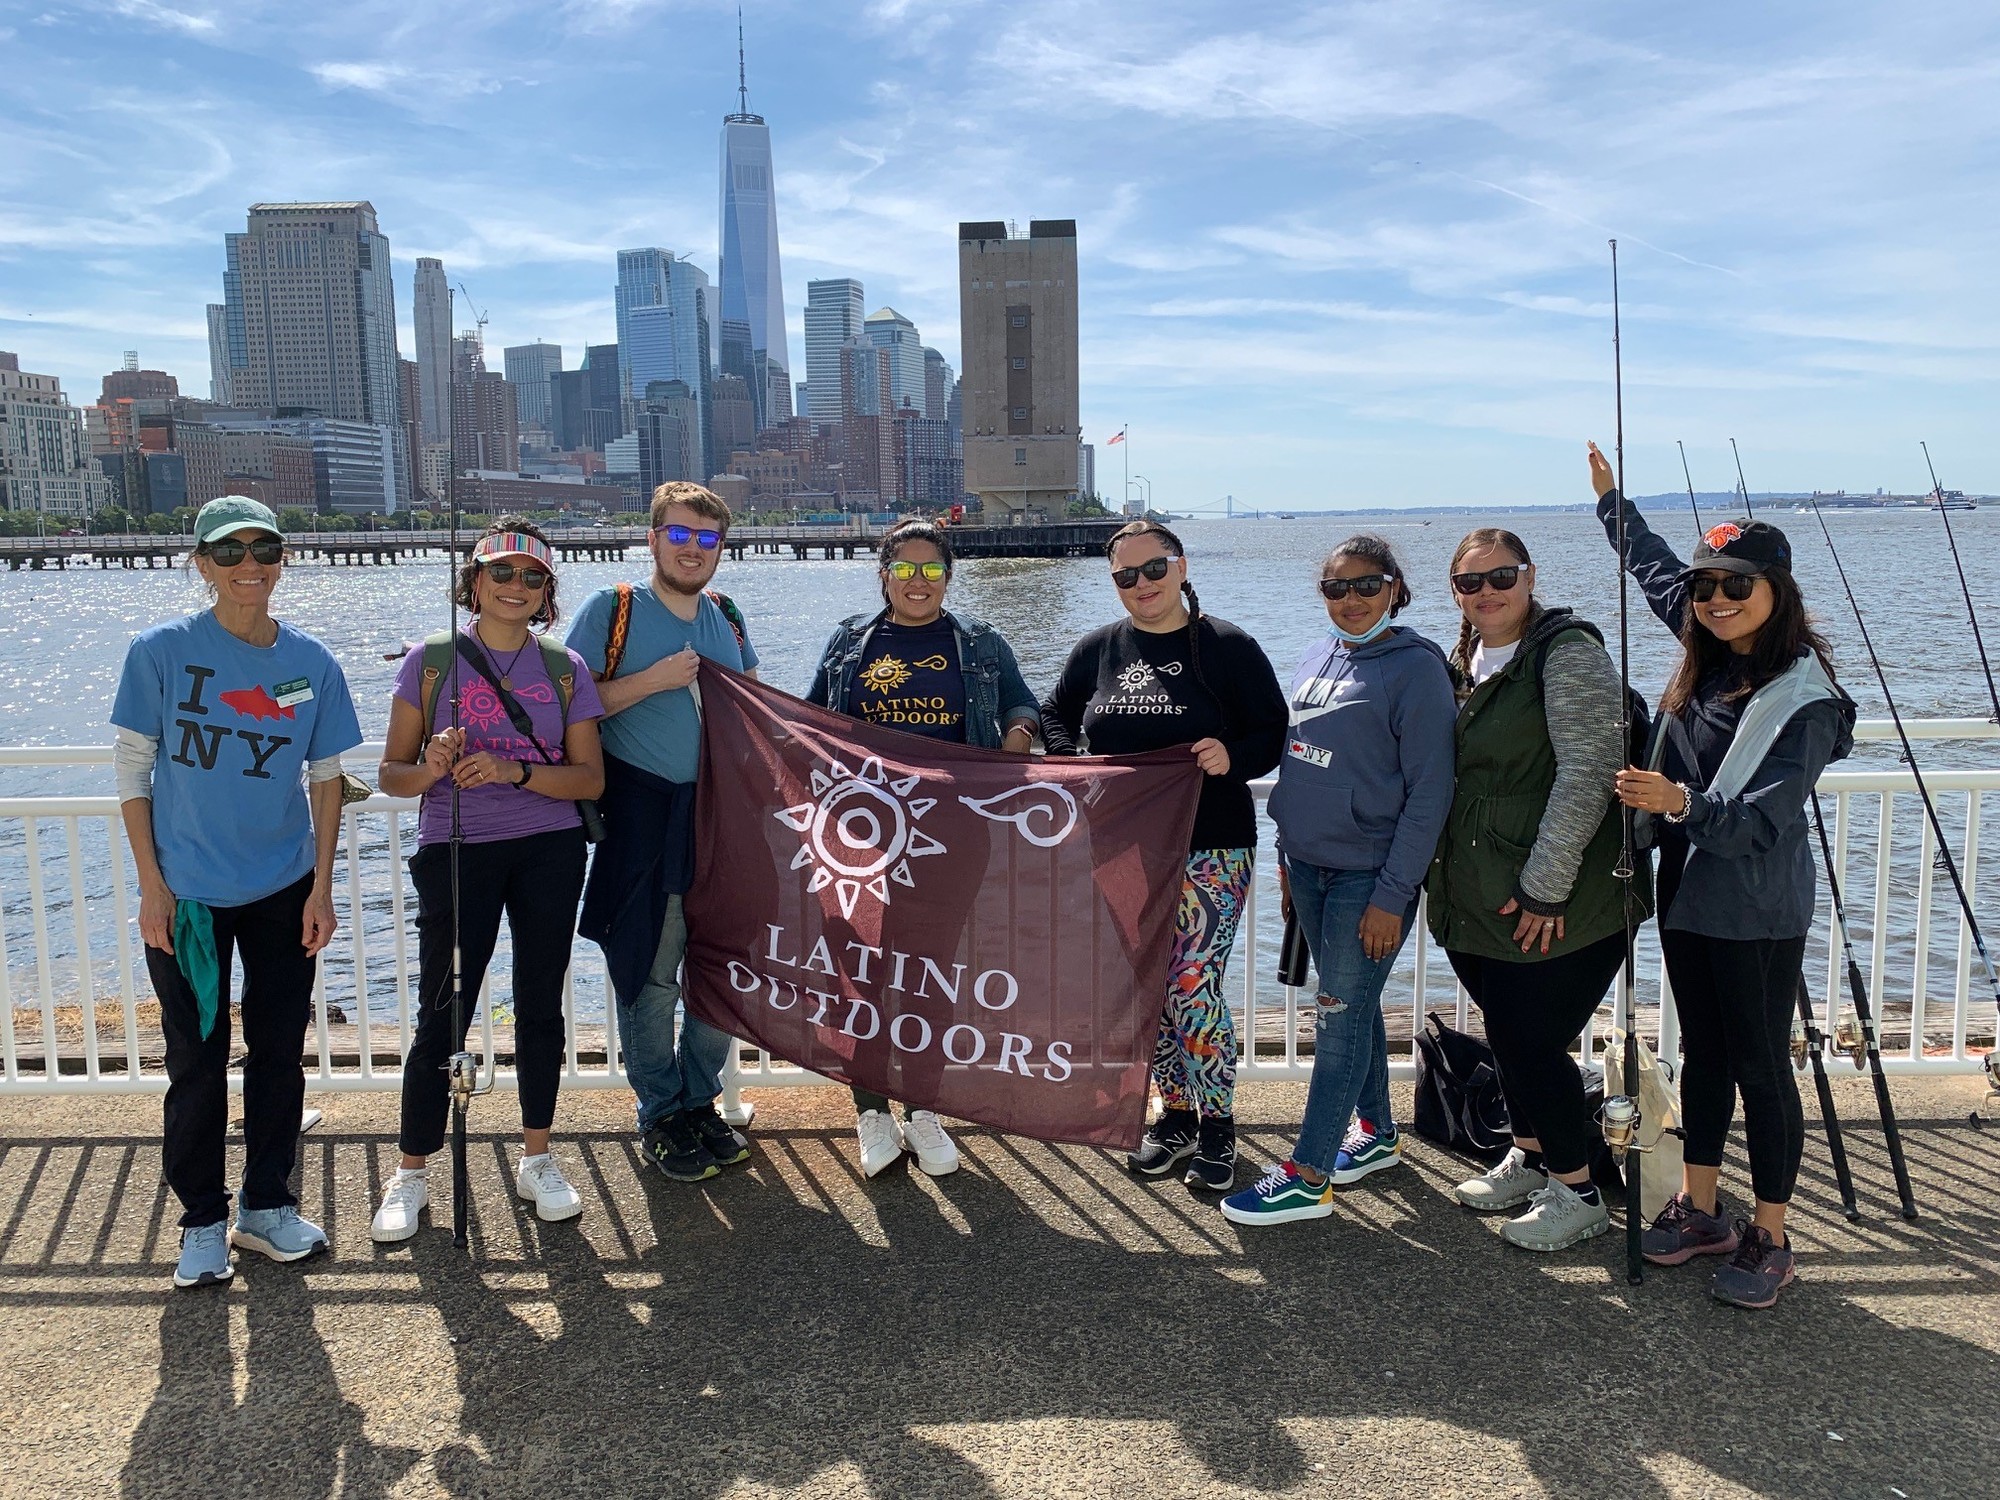 A group of people holding a Latino Outdoors flag standing in front of a NYC back drop